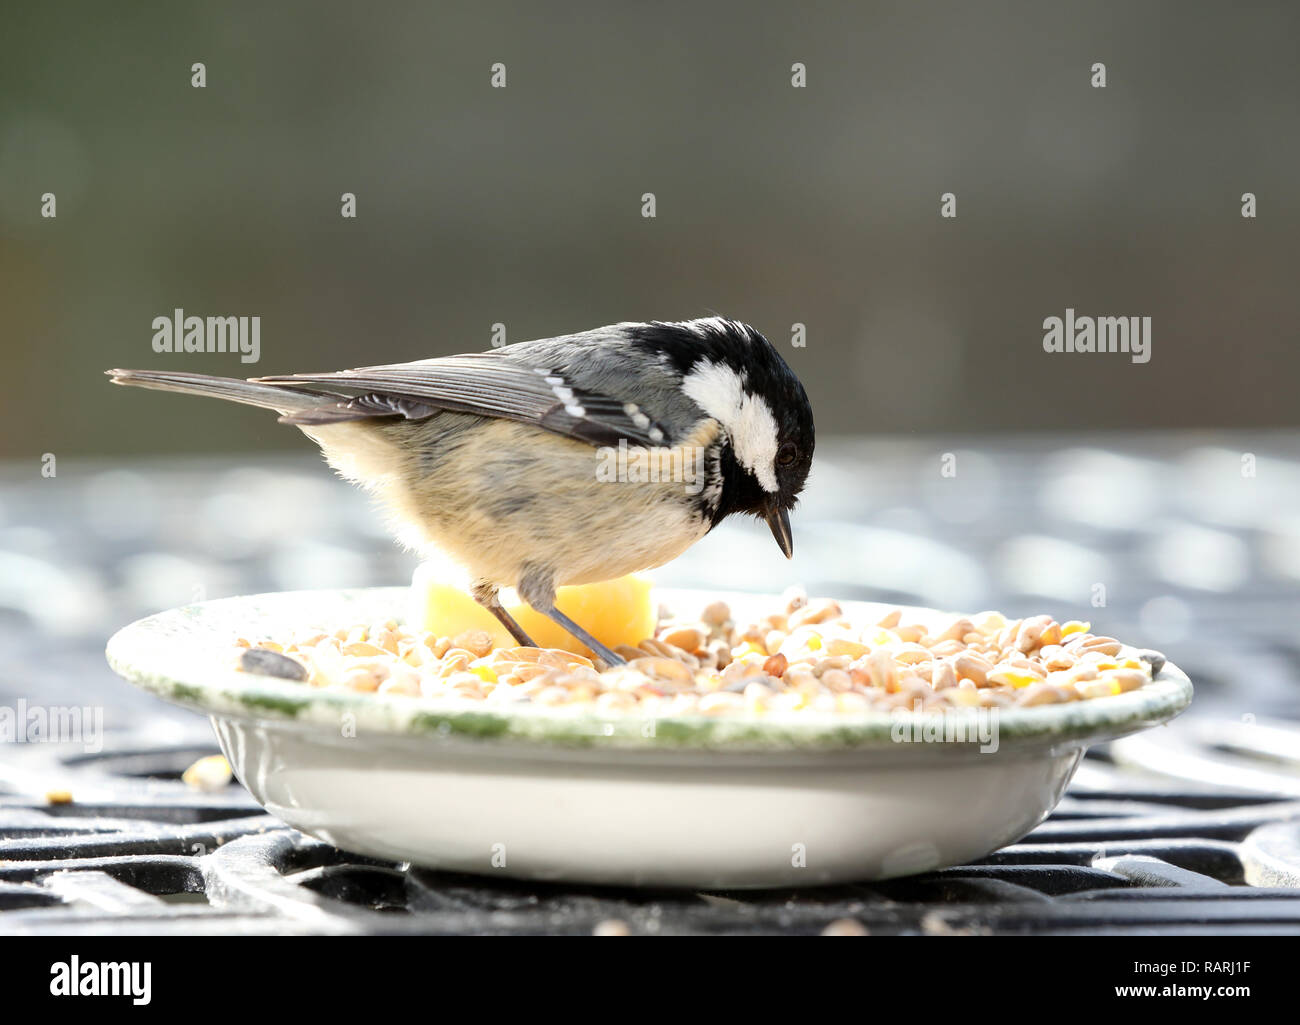 Coal tit, Periparus ater, adult, feeding on seeds in dish. Stock Photo